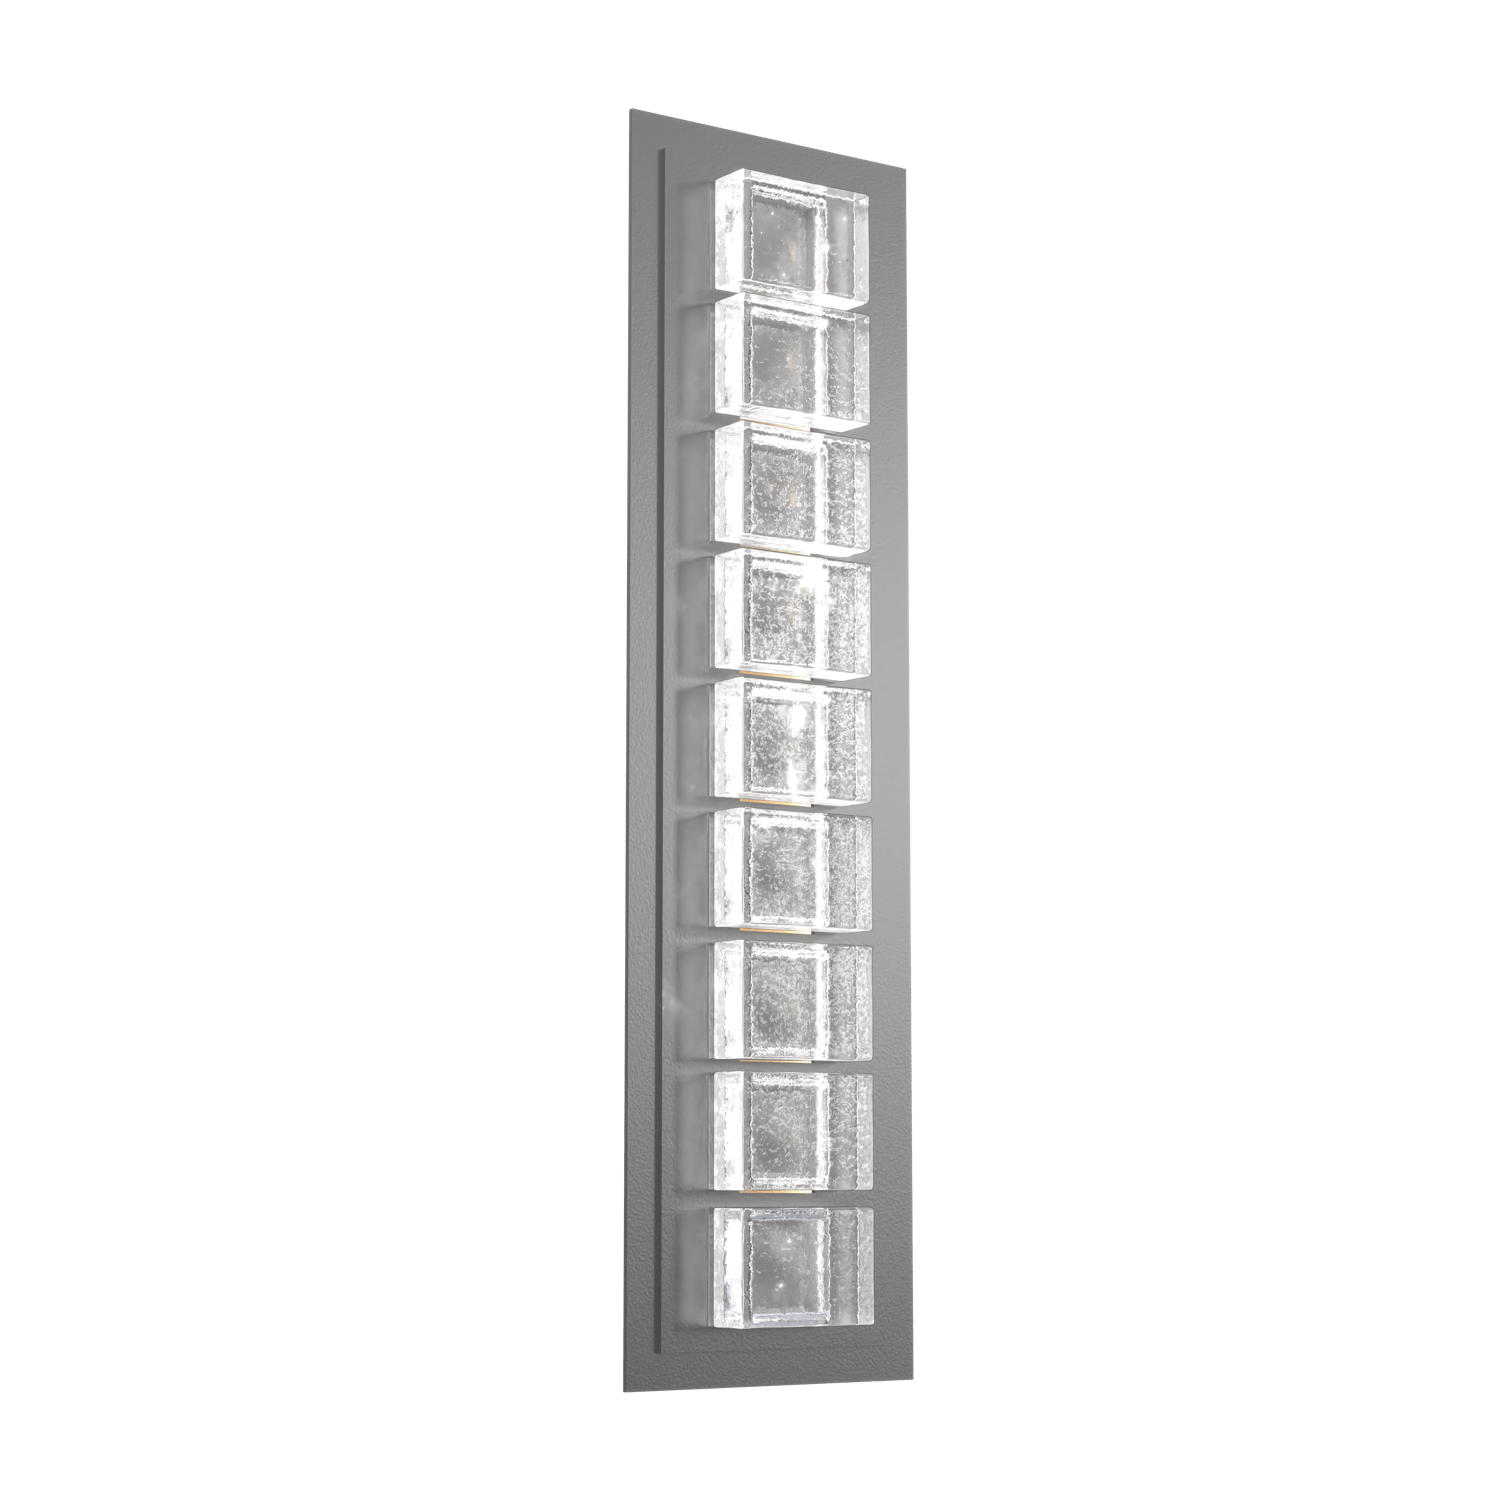 ODB0087-02-AG-TP-Hammerton-Studio-Tessera-28-inch-outdoor-sconce-with-argento-grey-finish-and-clear-pave-cast-glass-shade-and-LED-lamping